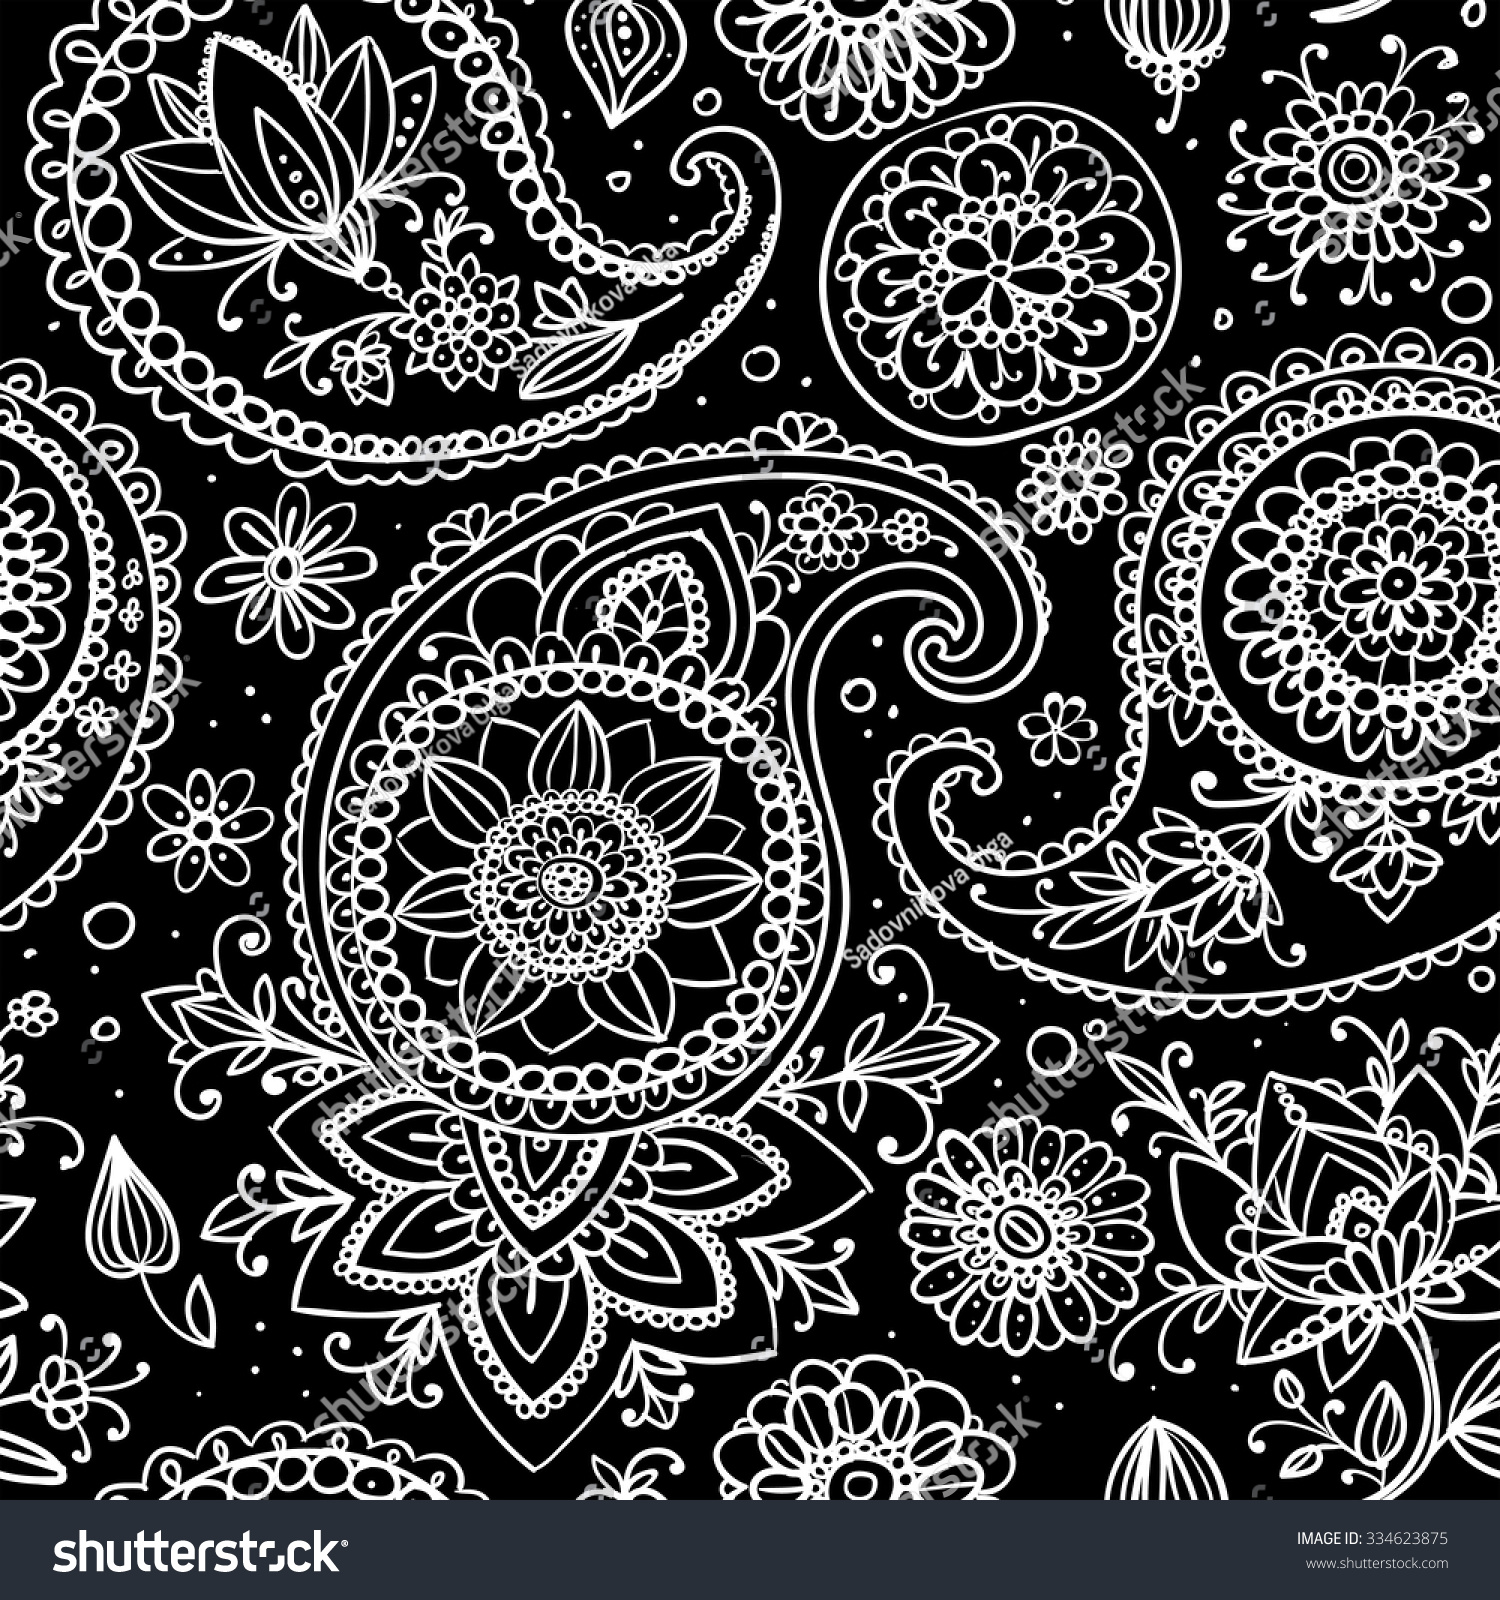 127,158 White paisley pattern Images, Stock Photos & Vectors | Shutterstock